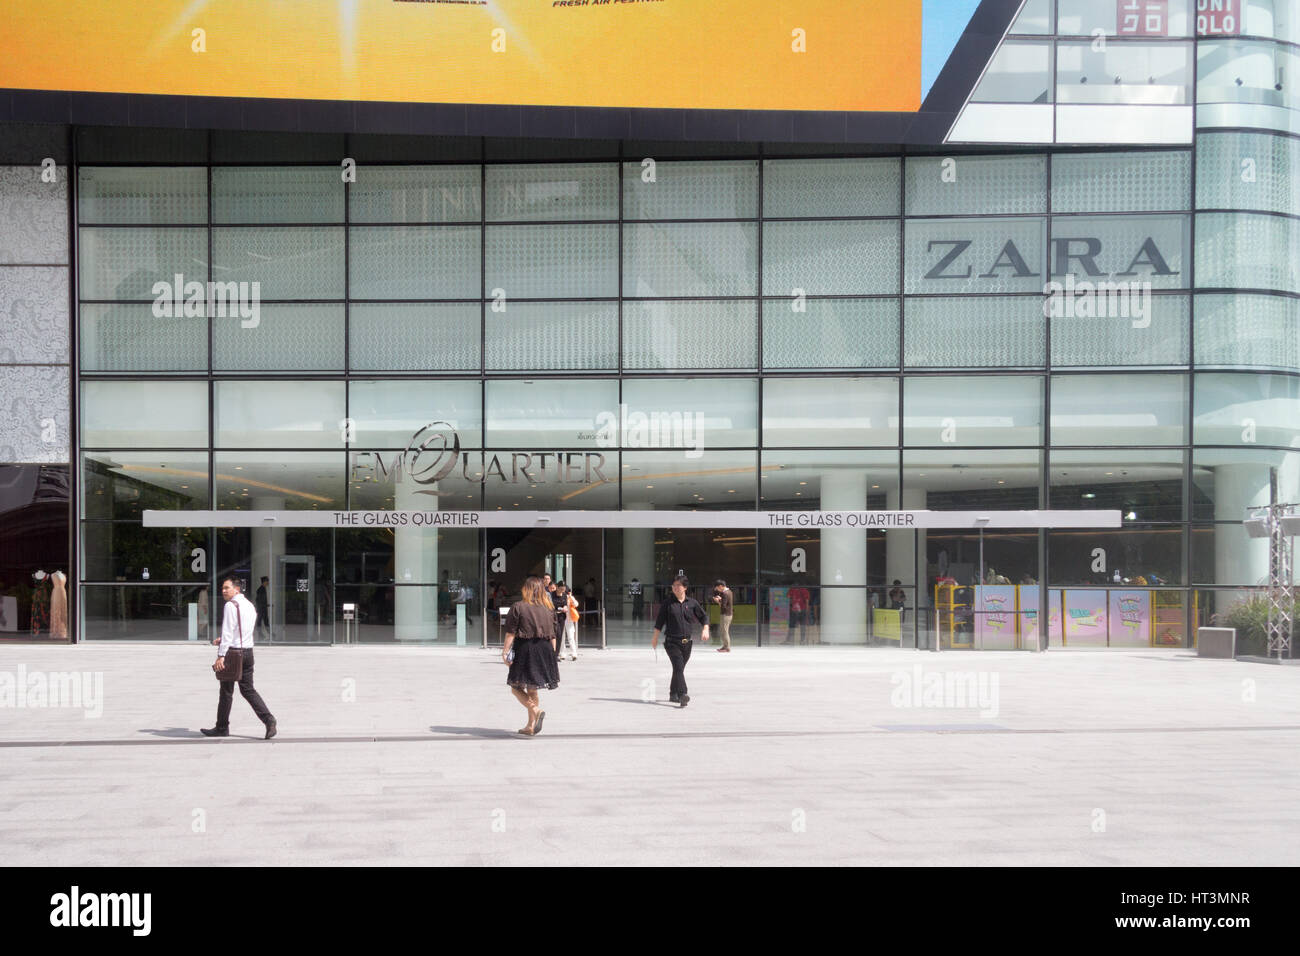 Zara shop and the entrance to the Glass quartier in the Emporium complex of  shopping malls in Bangkok, Thailand Stock Photo - Alamy